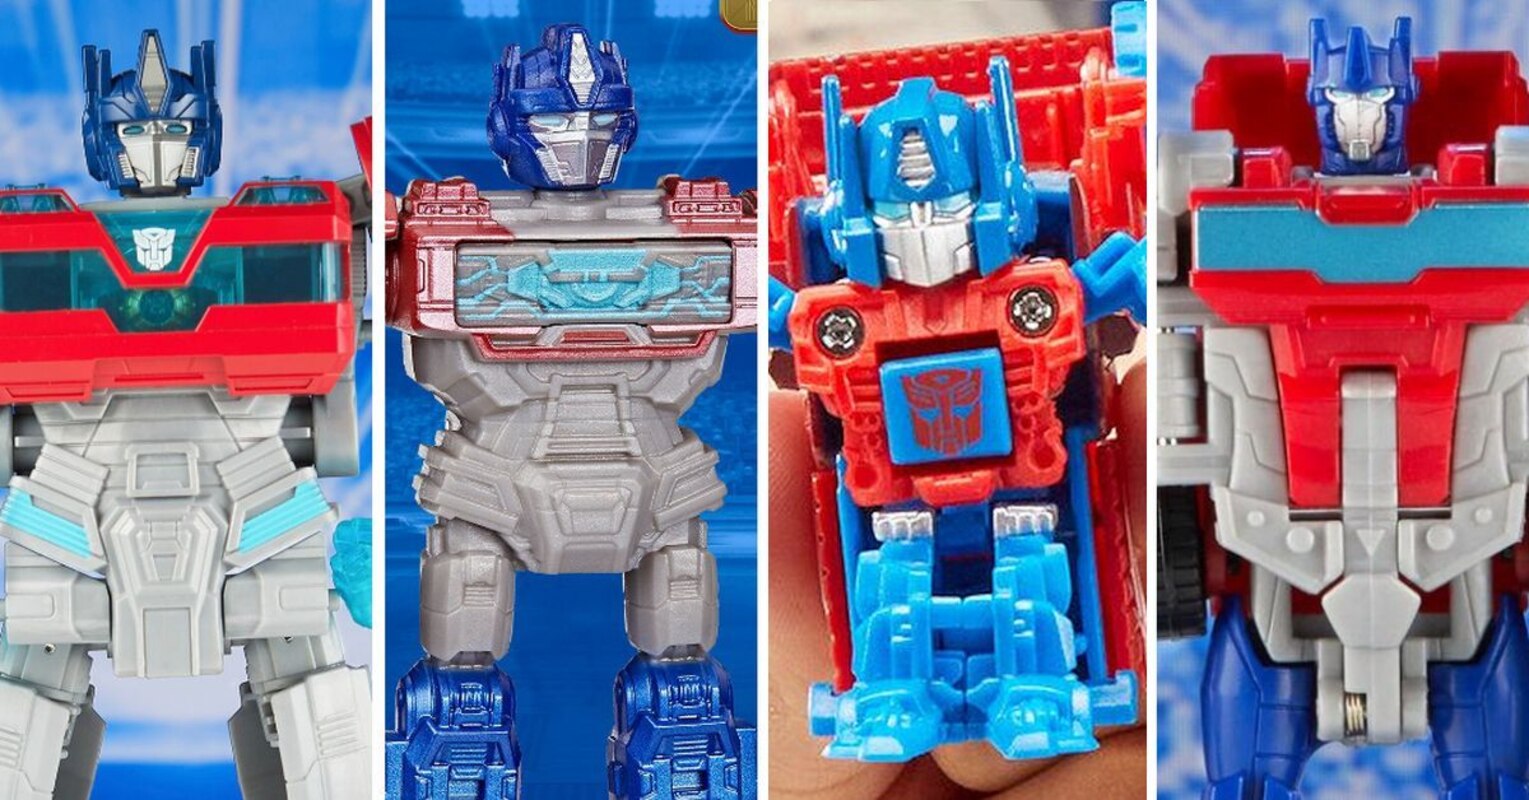 Daily Prime - Bot Shots Return, MORE Transformers: ONE Optimus Prime Toys Rolling Out